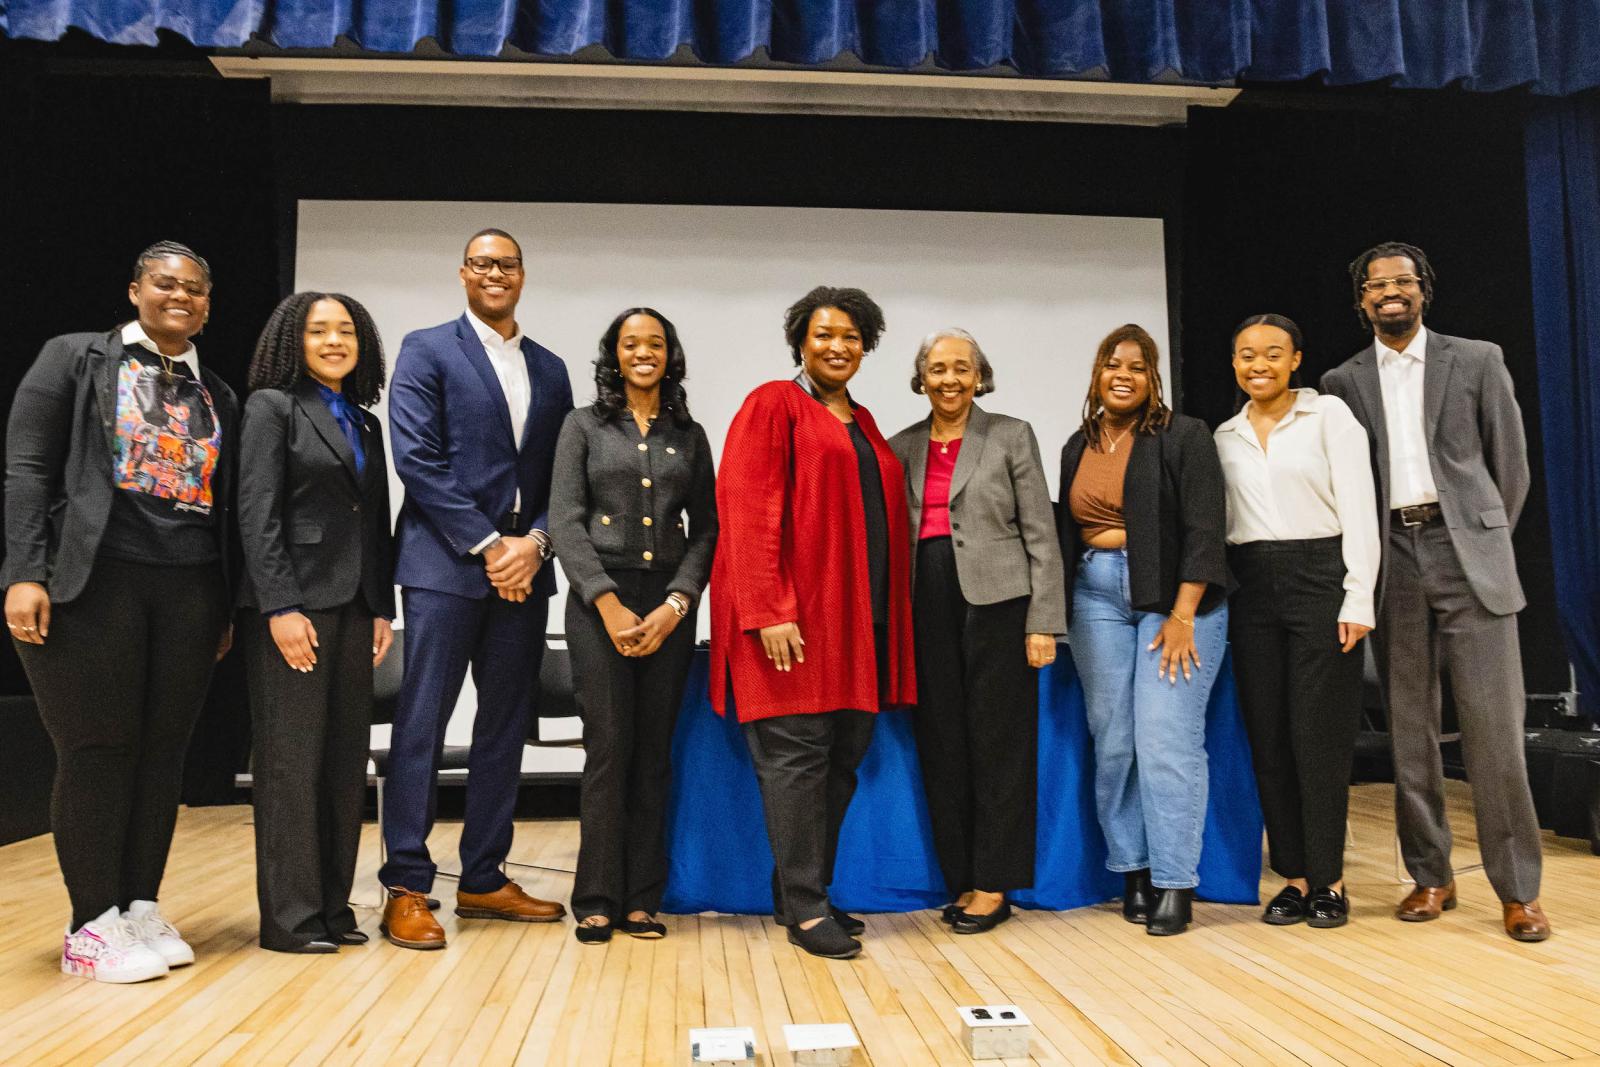 Stacey Abrams poses with student panelists and other supporters